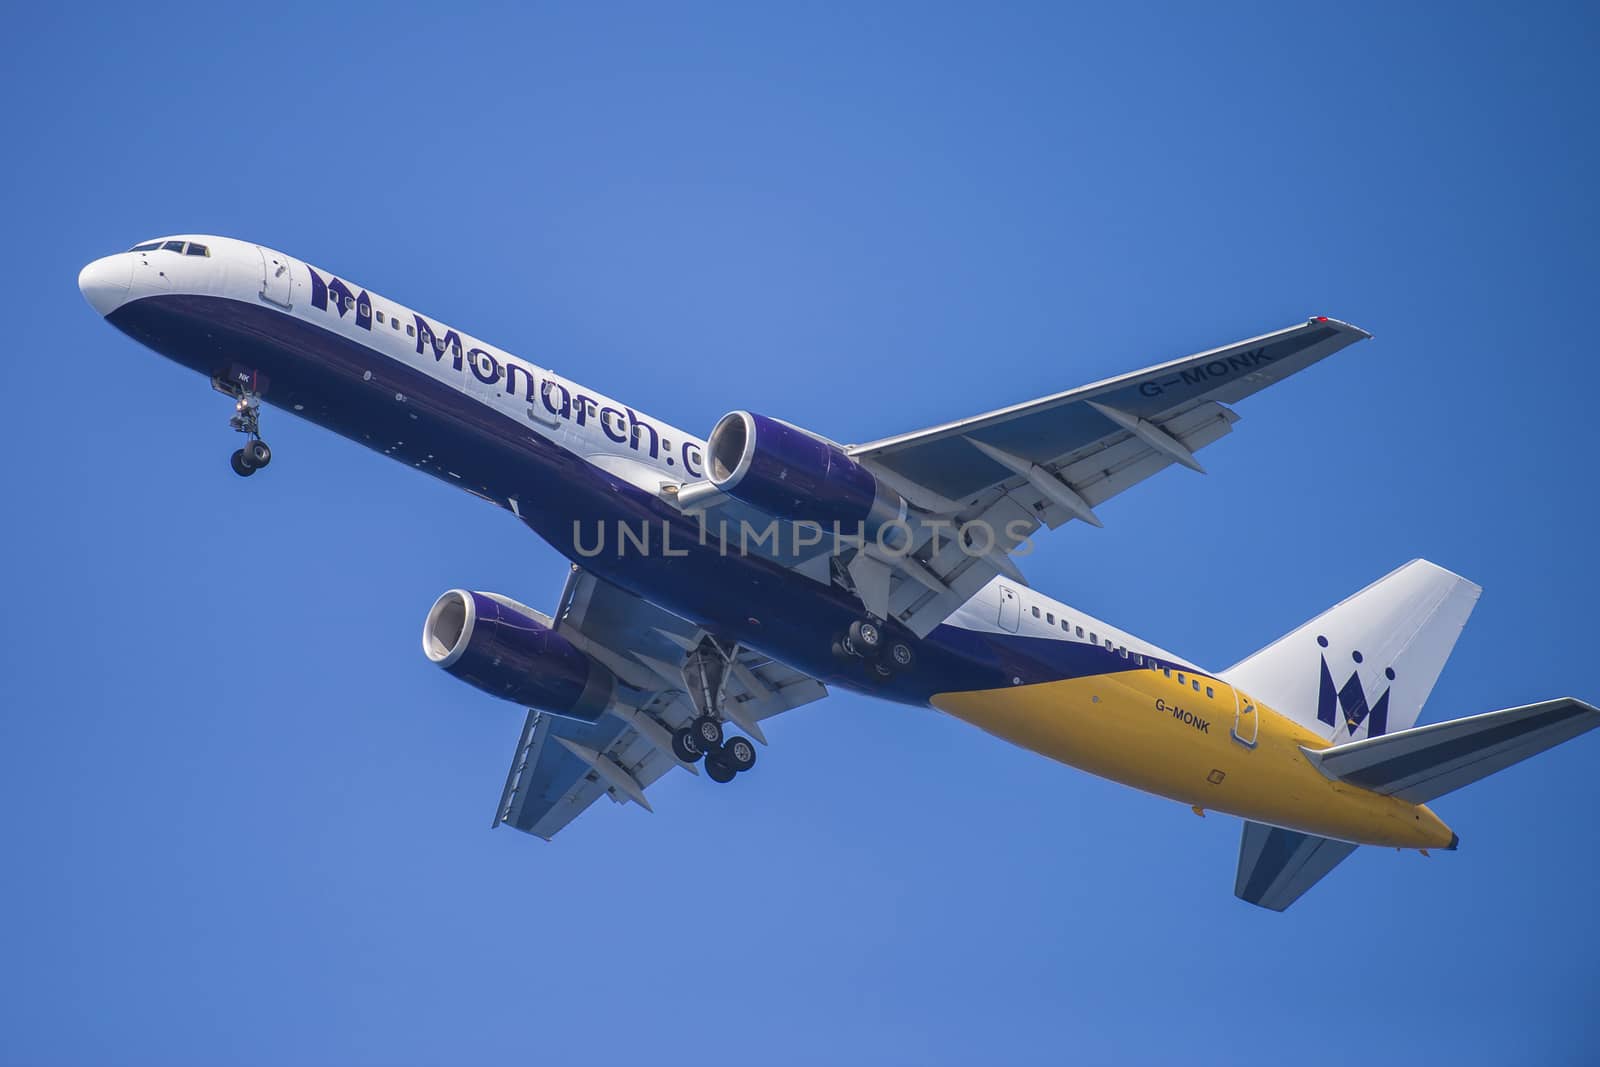 G-monk Monarch airlines Boeing 757-2T7, British. The pictures of the planes are shot very close an airport just before landing. September 2013.